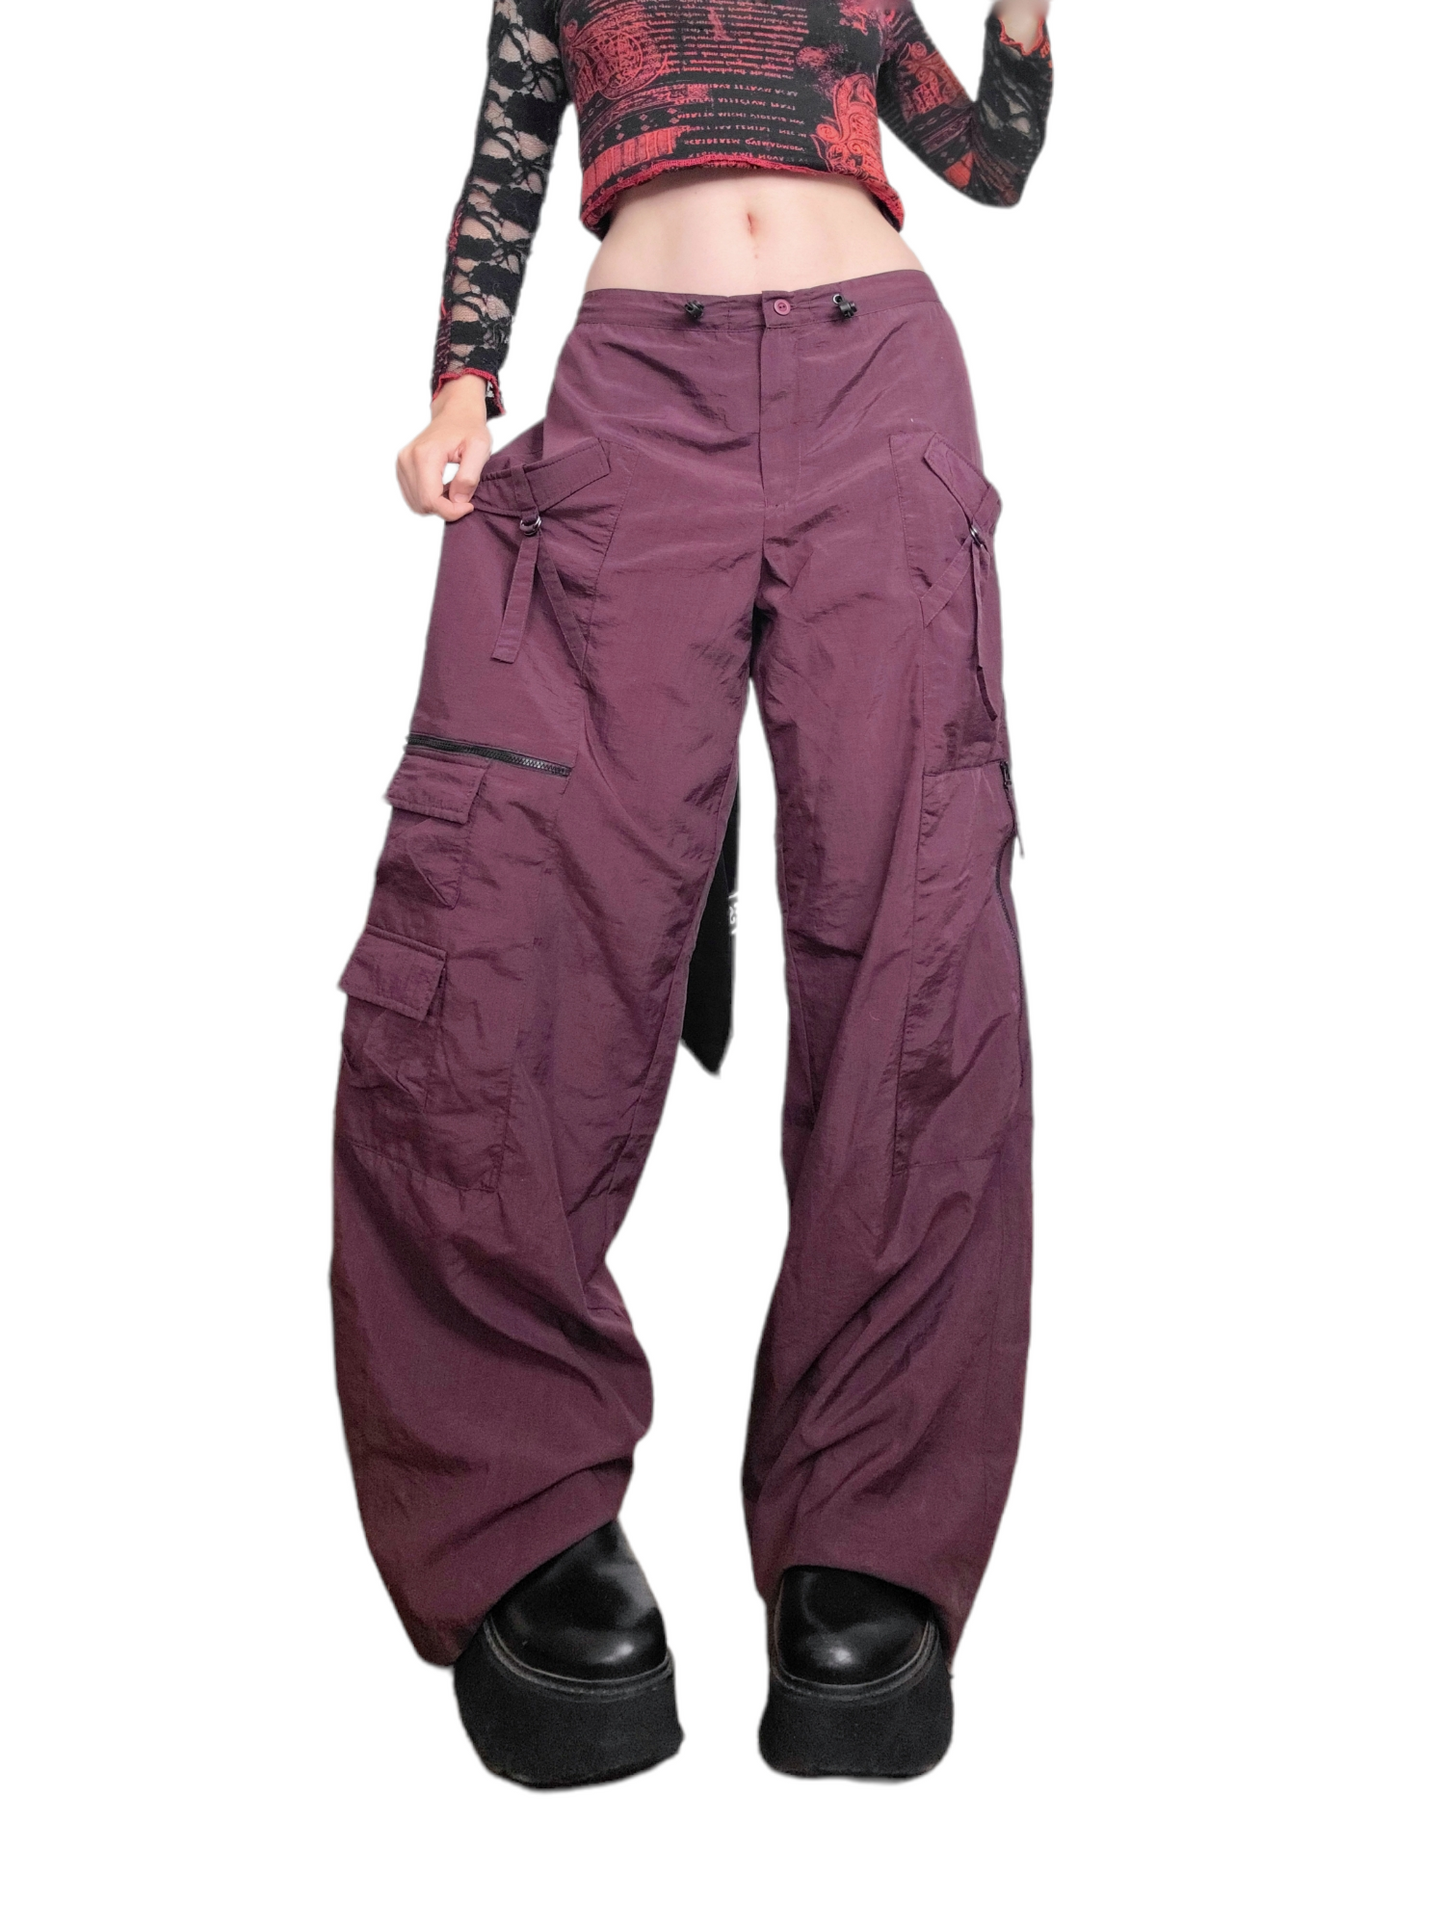 Parachute pants fall vintage skater y2k cargo grunge 90s multipoches gorpcore techwear